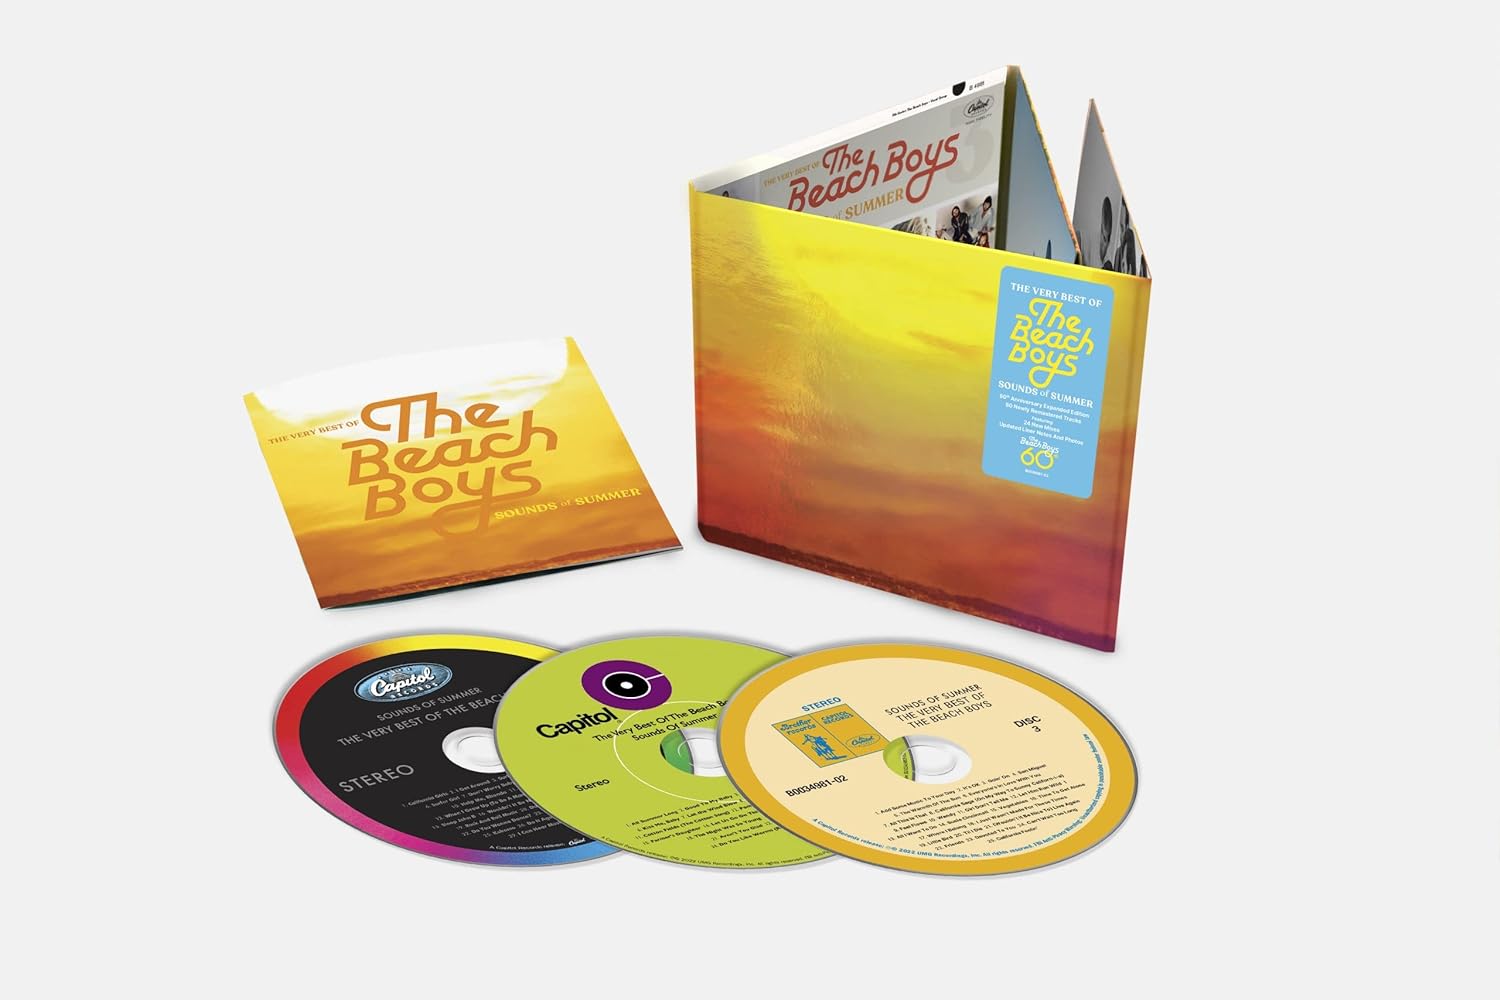 The Beach Boys – The Very Best Of (Sounds Of Summer) - 3 x CD SET